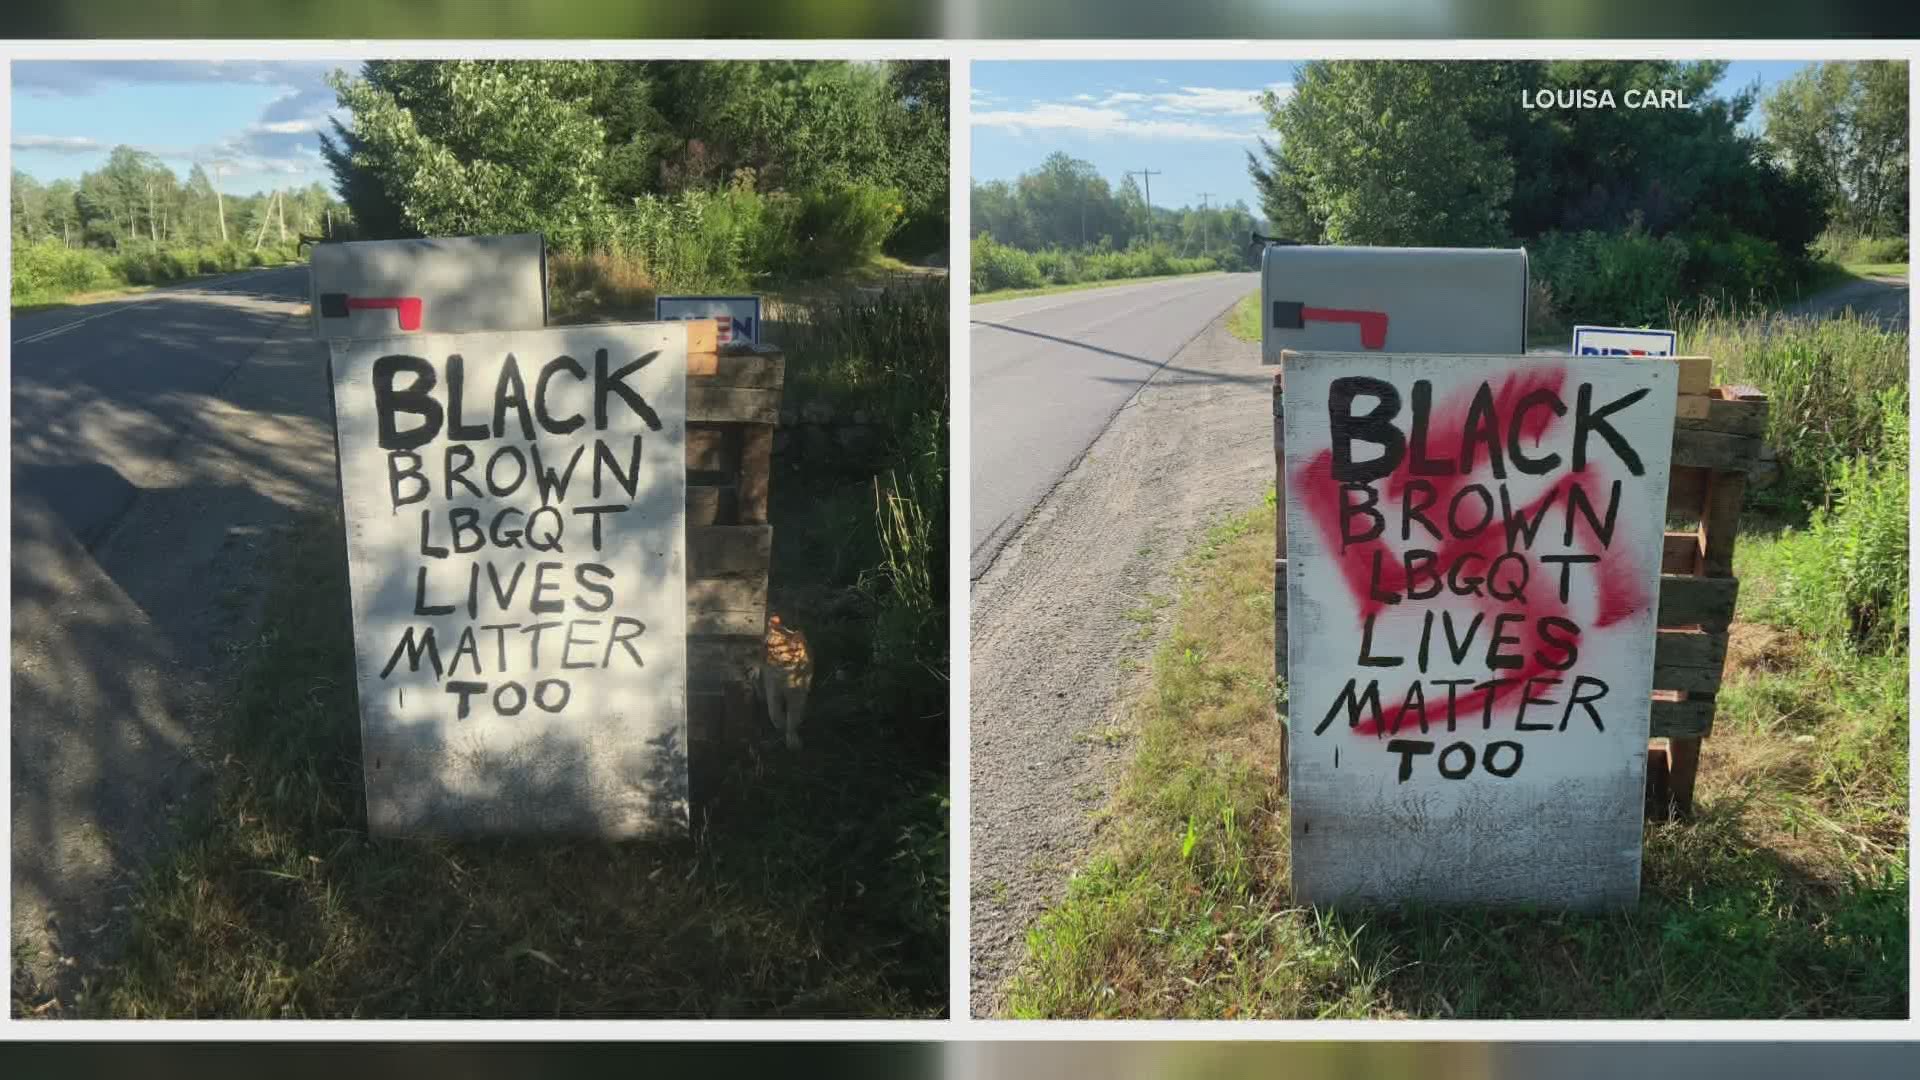 State Police are investigating after a woman says her BLM sign was vandalized with a swastika.